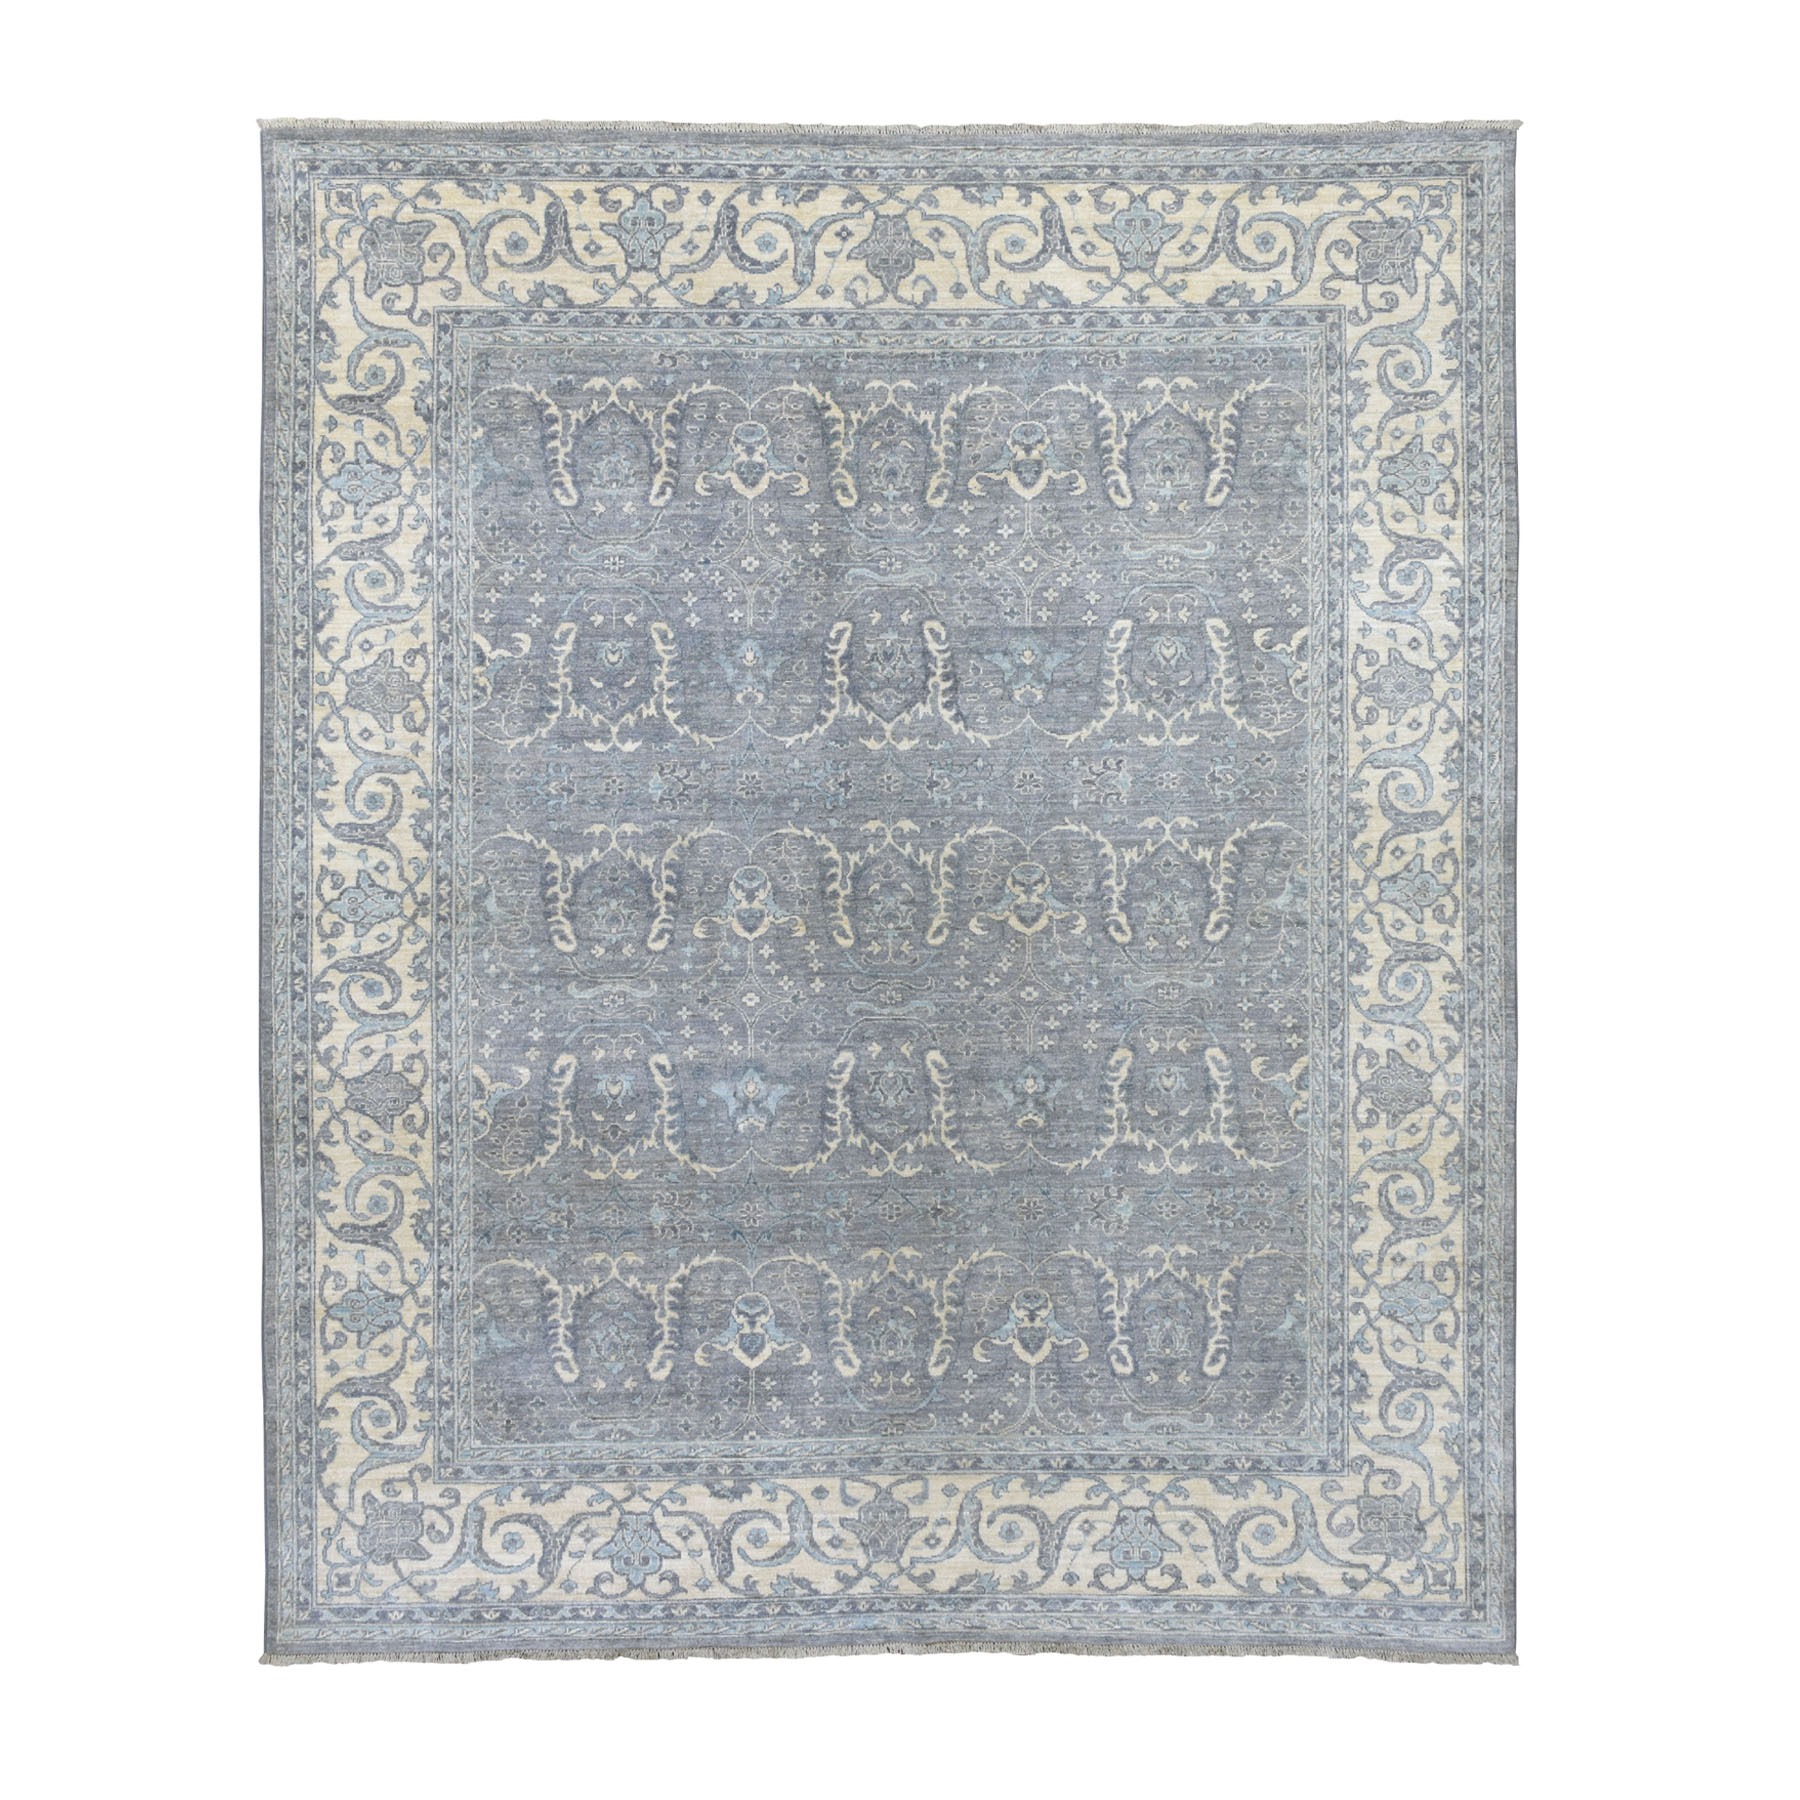 Agra And Turkish Collection Hand Knotted Grey Rug No: 1113552